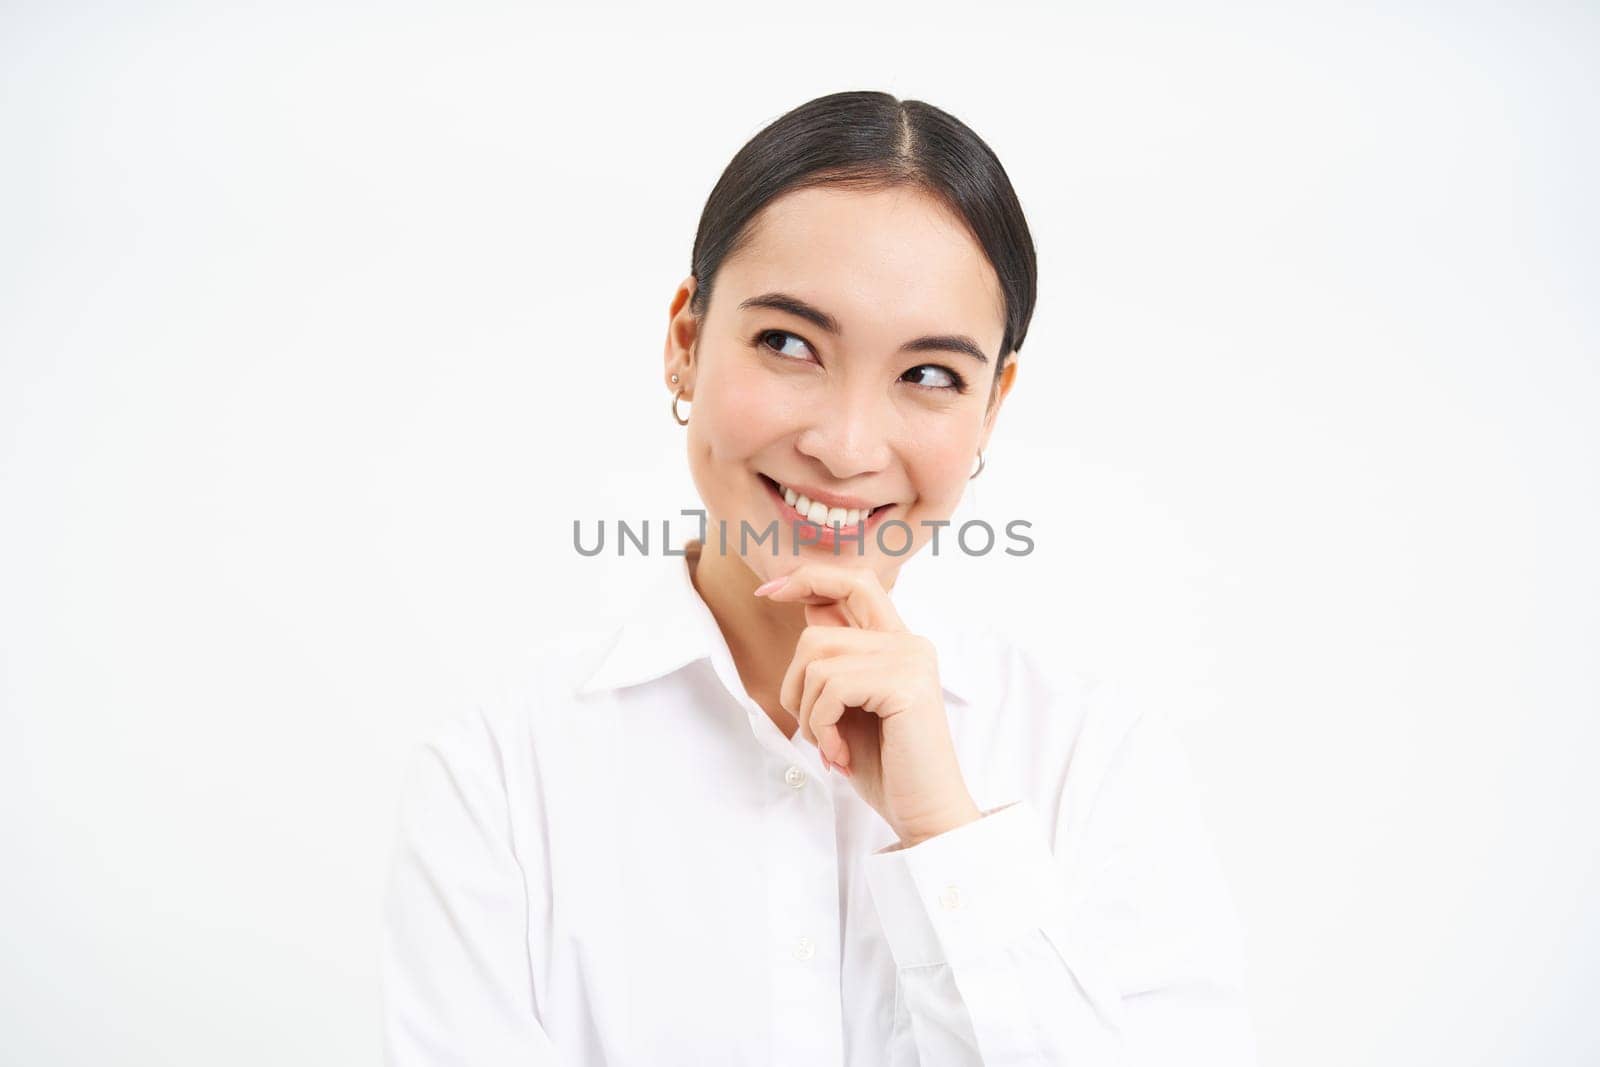 Portrait of businesswoman, asian lady boss thinks, looks thoughtful, pondering something with serious face, standing over white background.